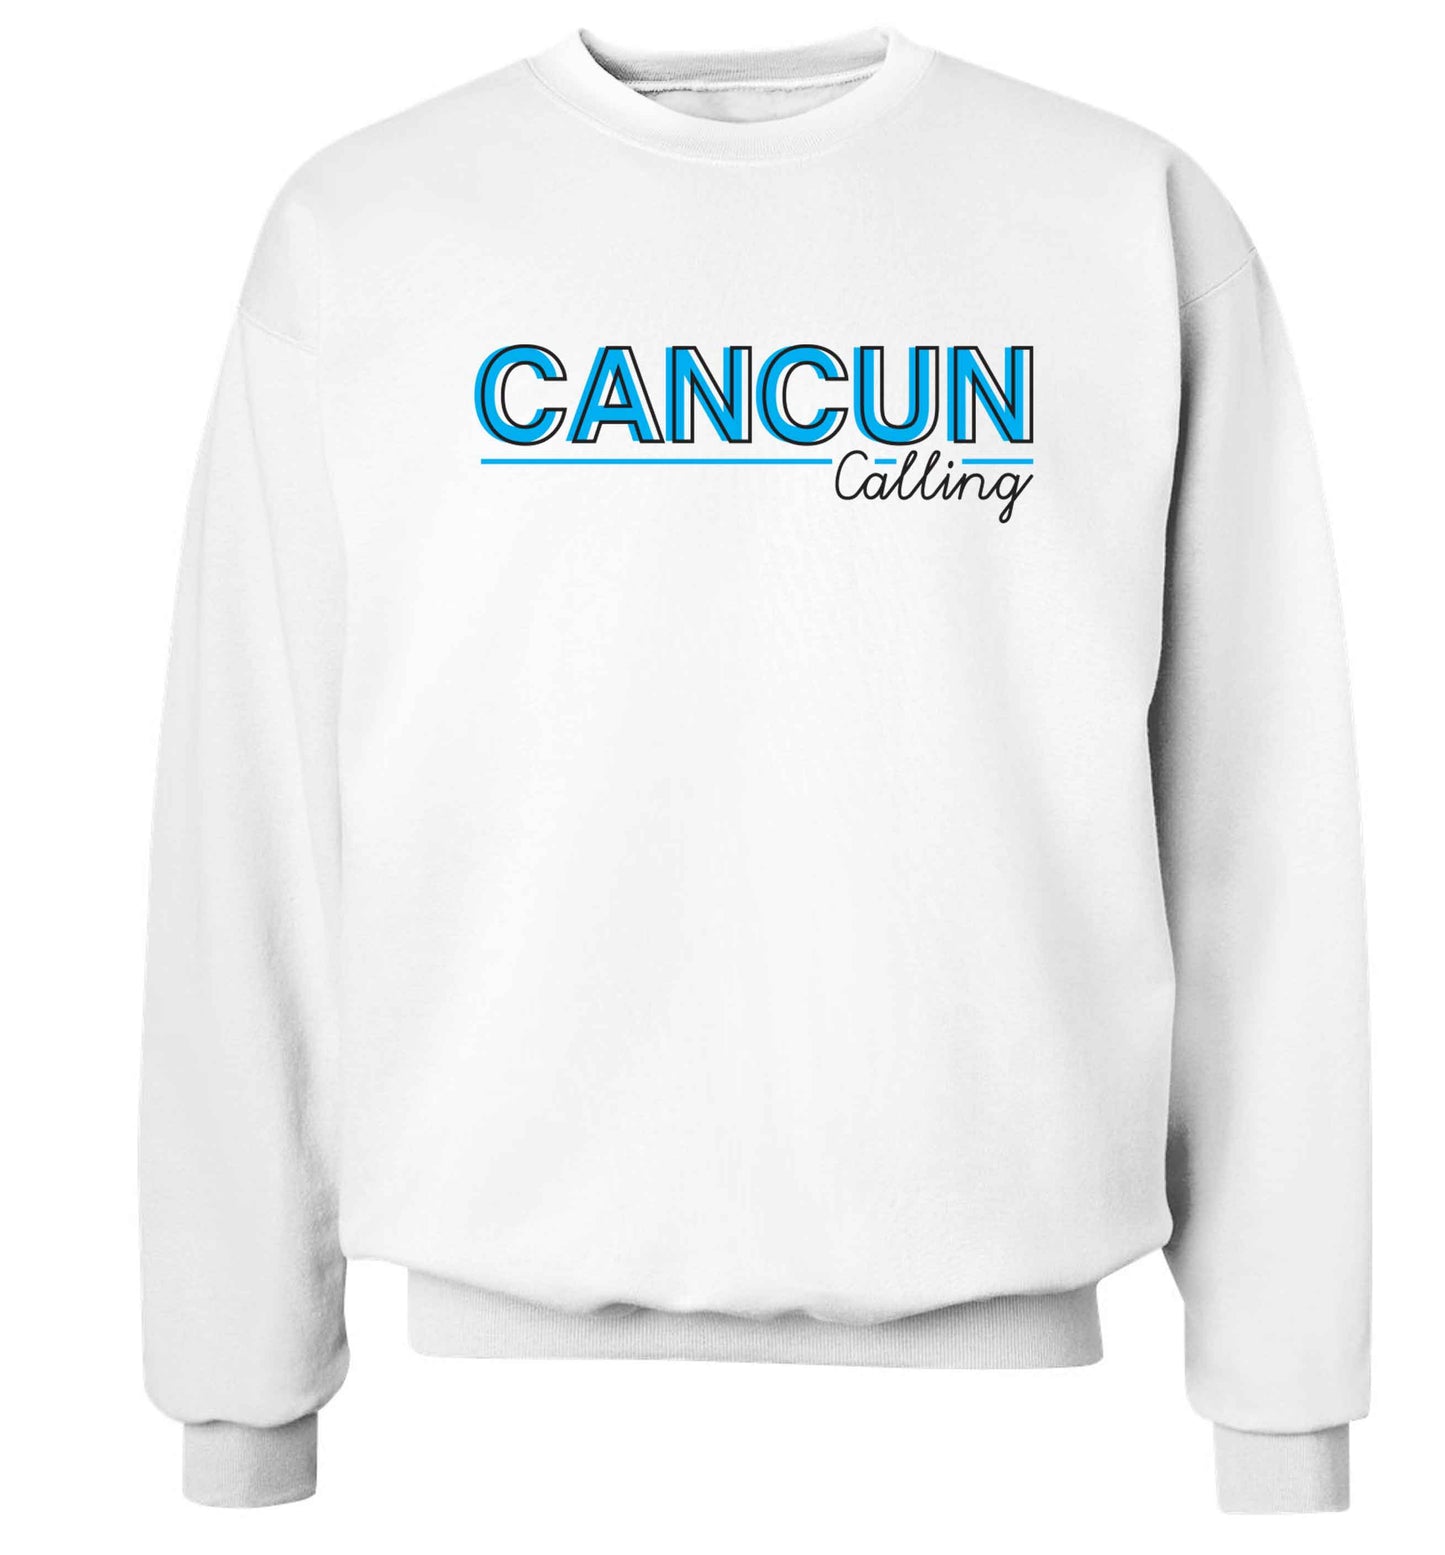 Cancun calling Adult's unisex white Sweater 2XL